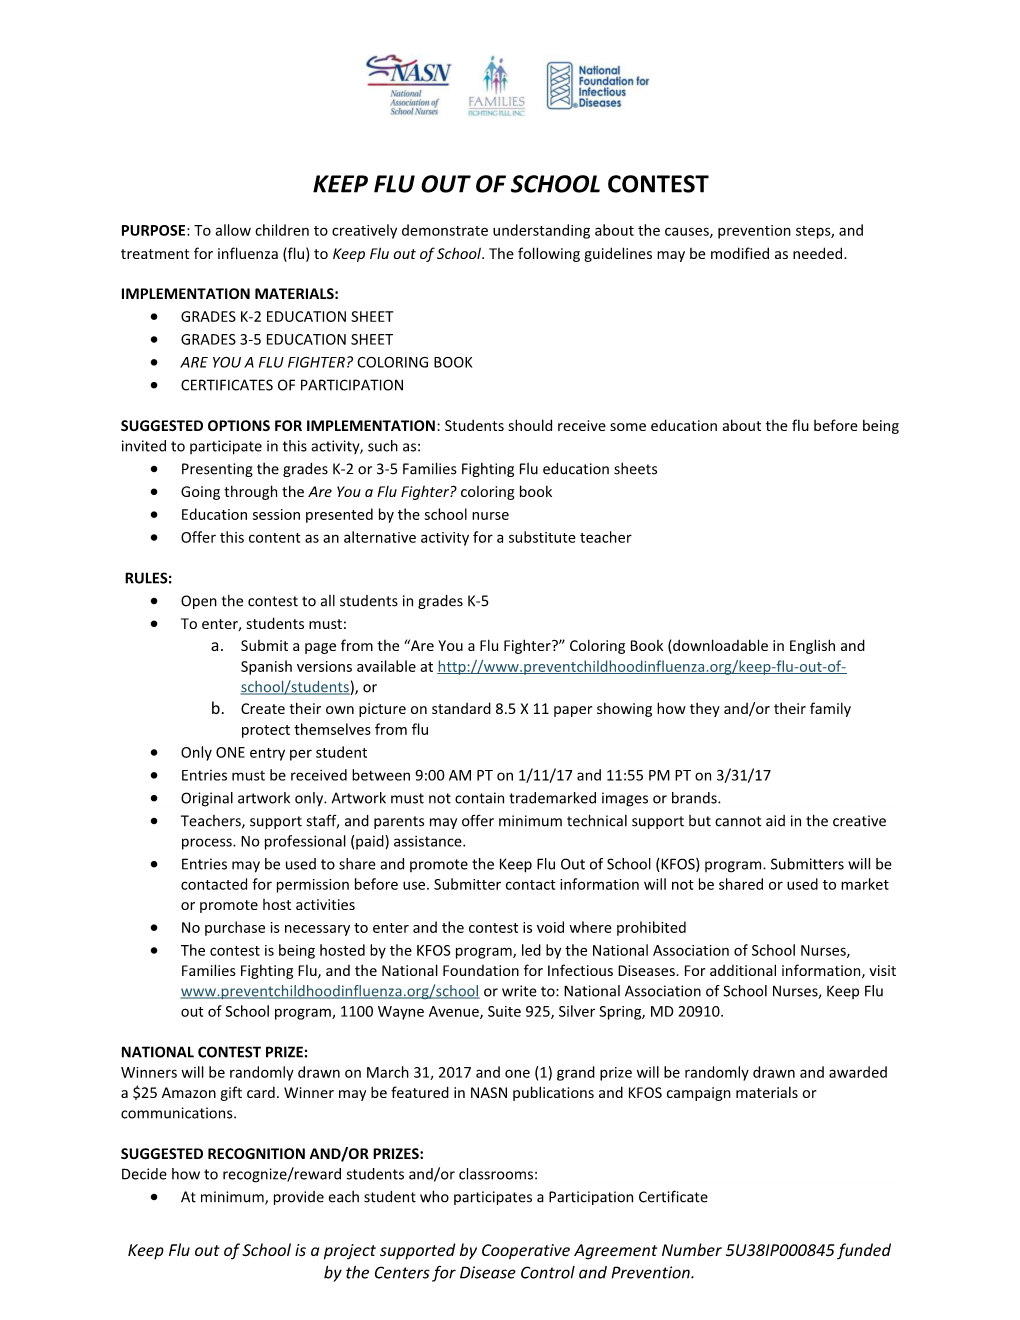 Keep Flu out of School Contest